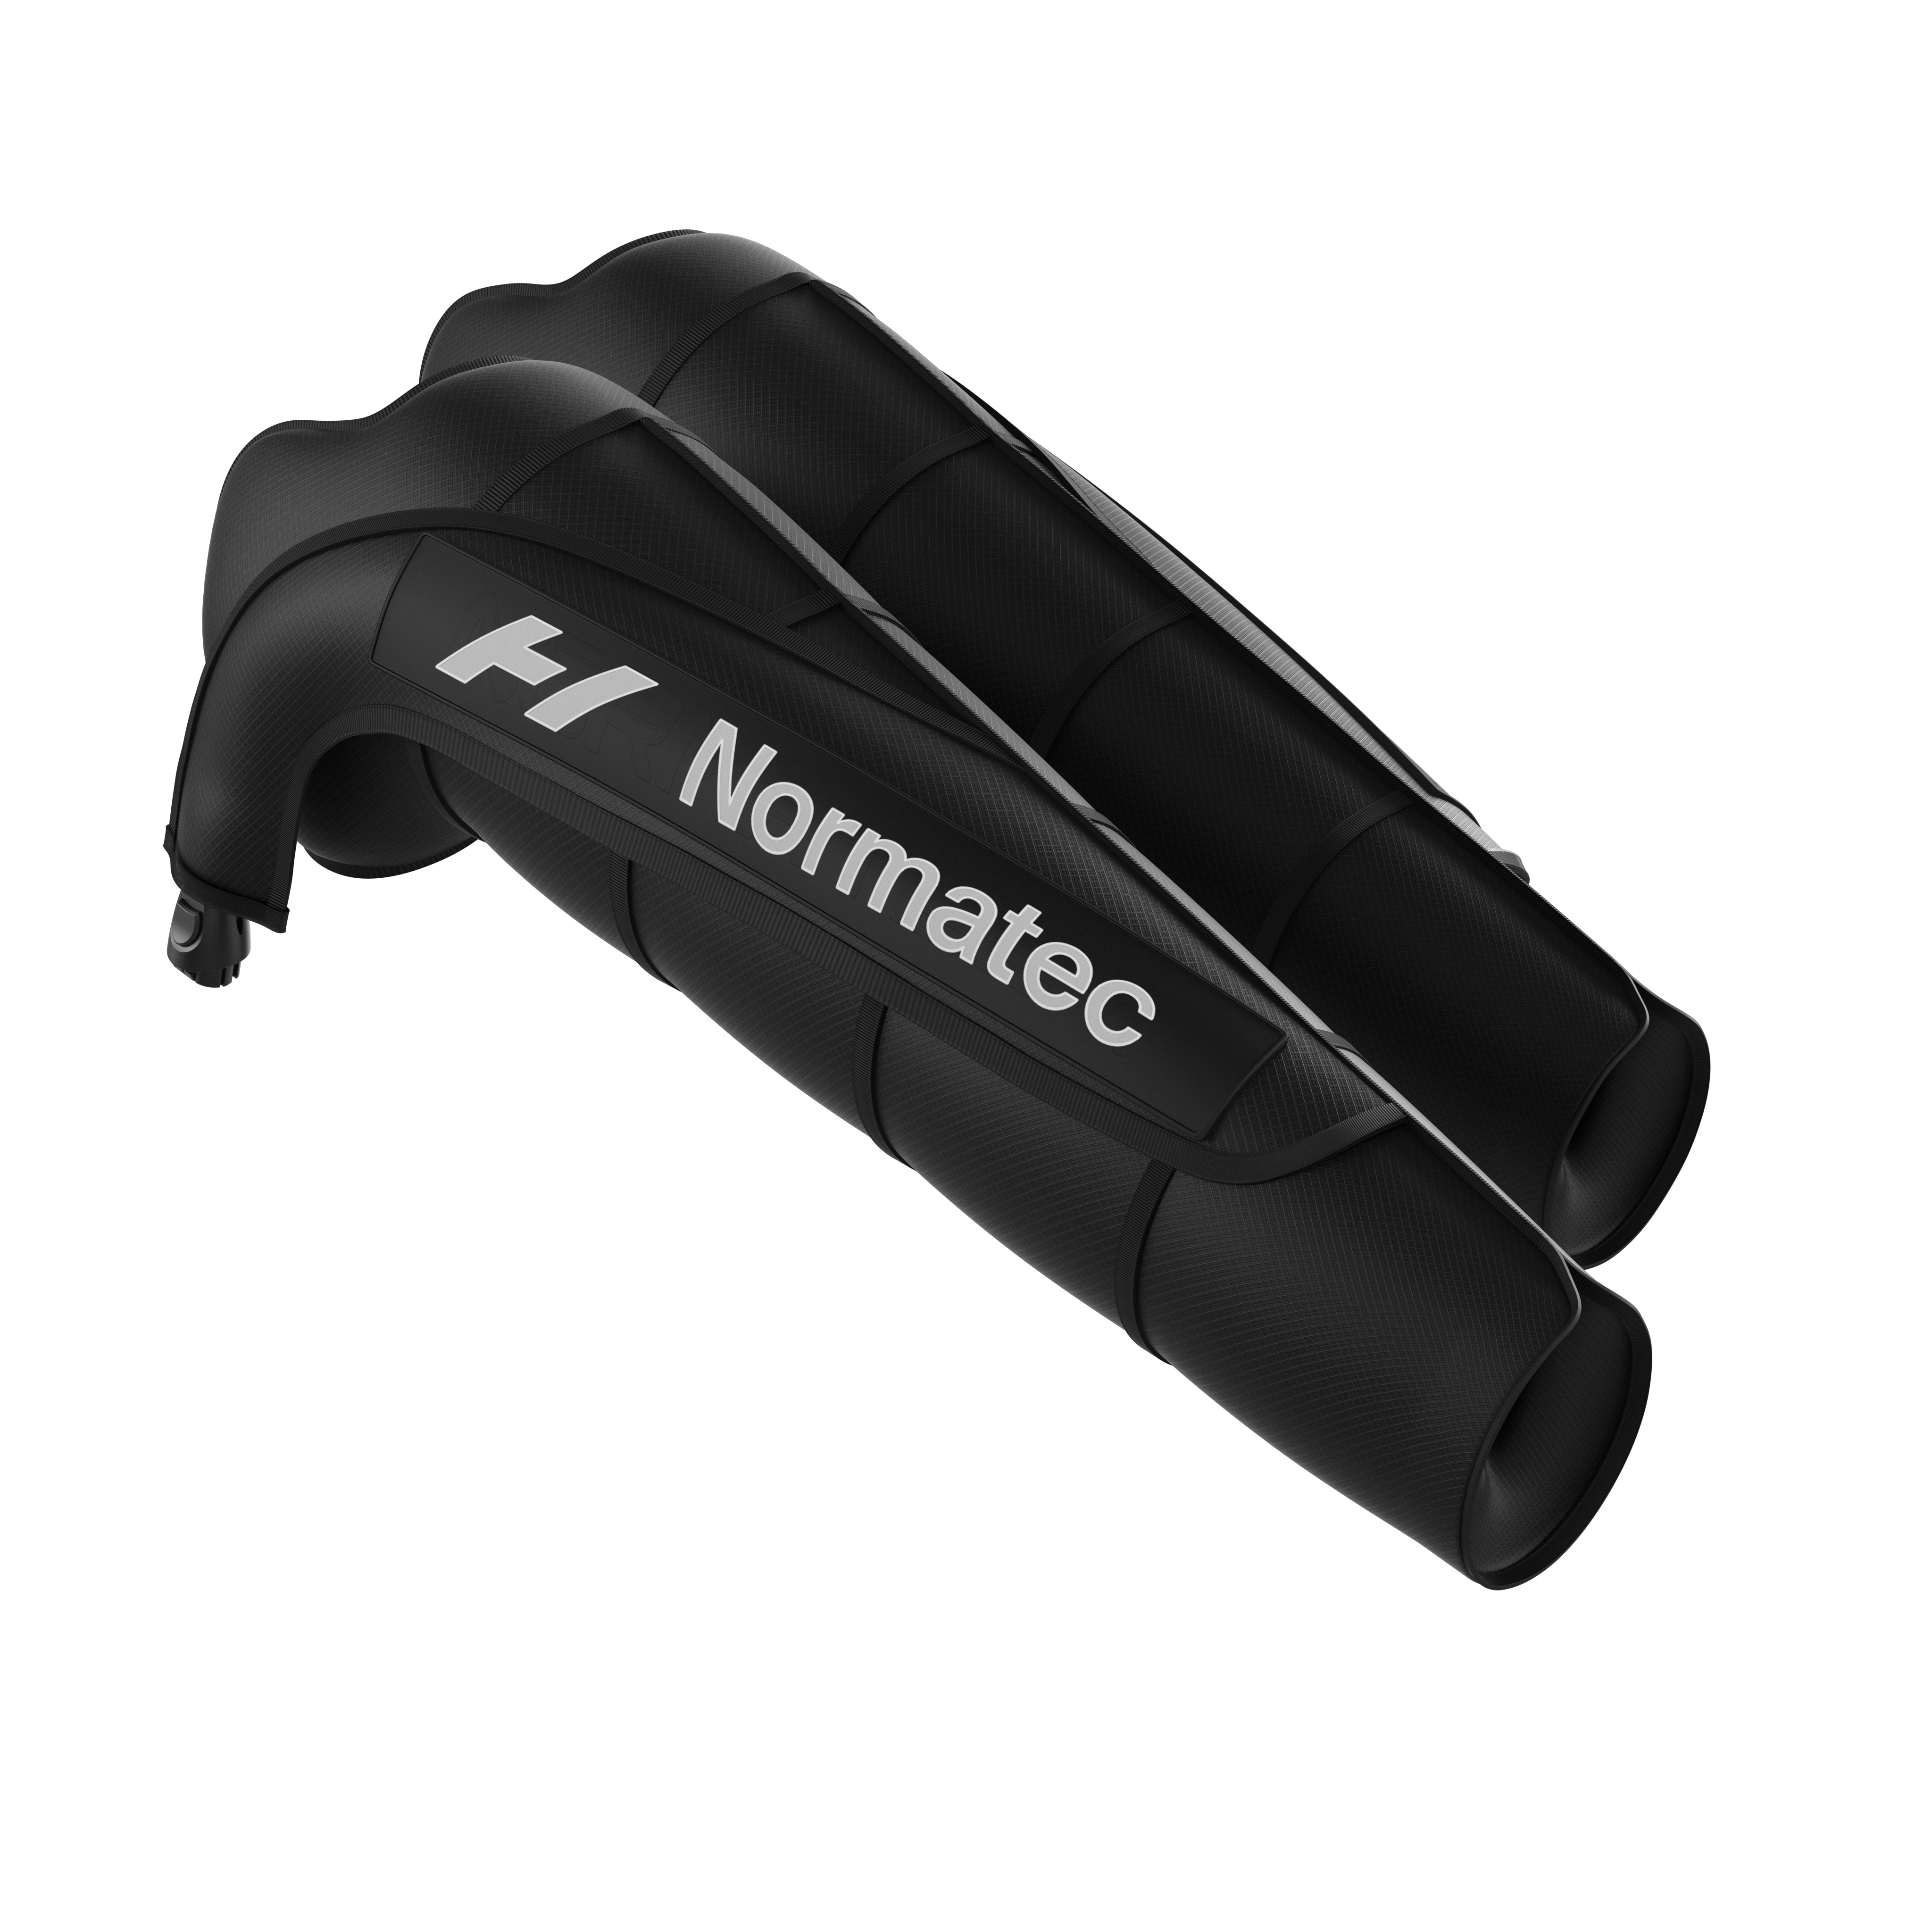 NormaTec 3 Leg Recovery System - Armset (Accessories)